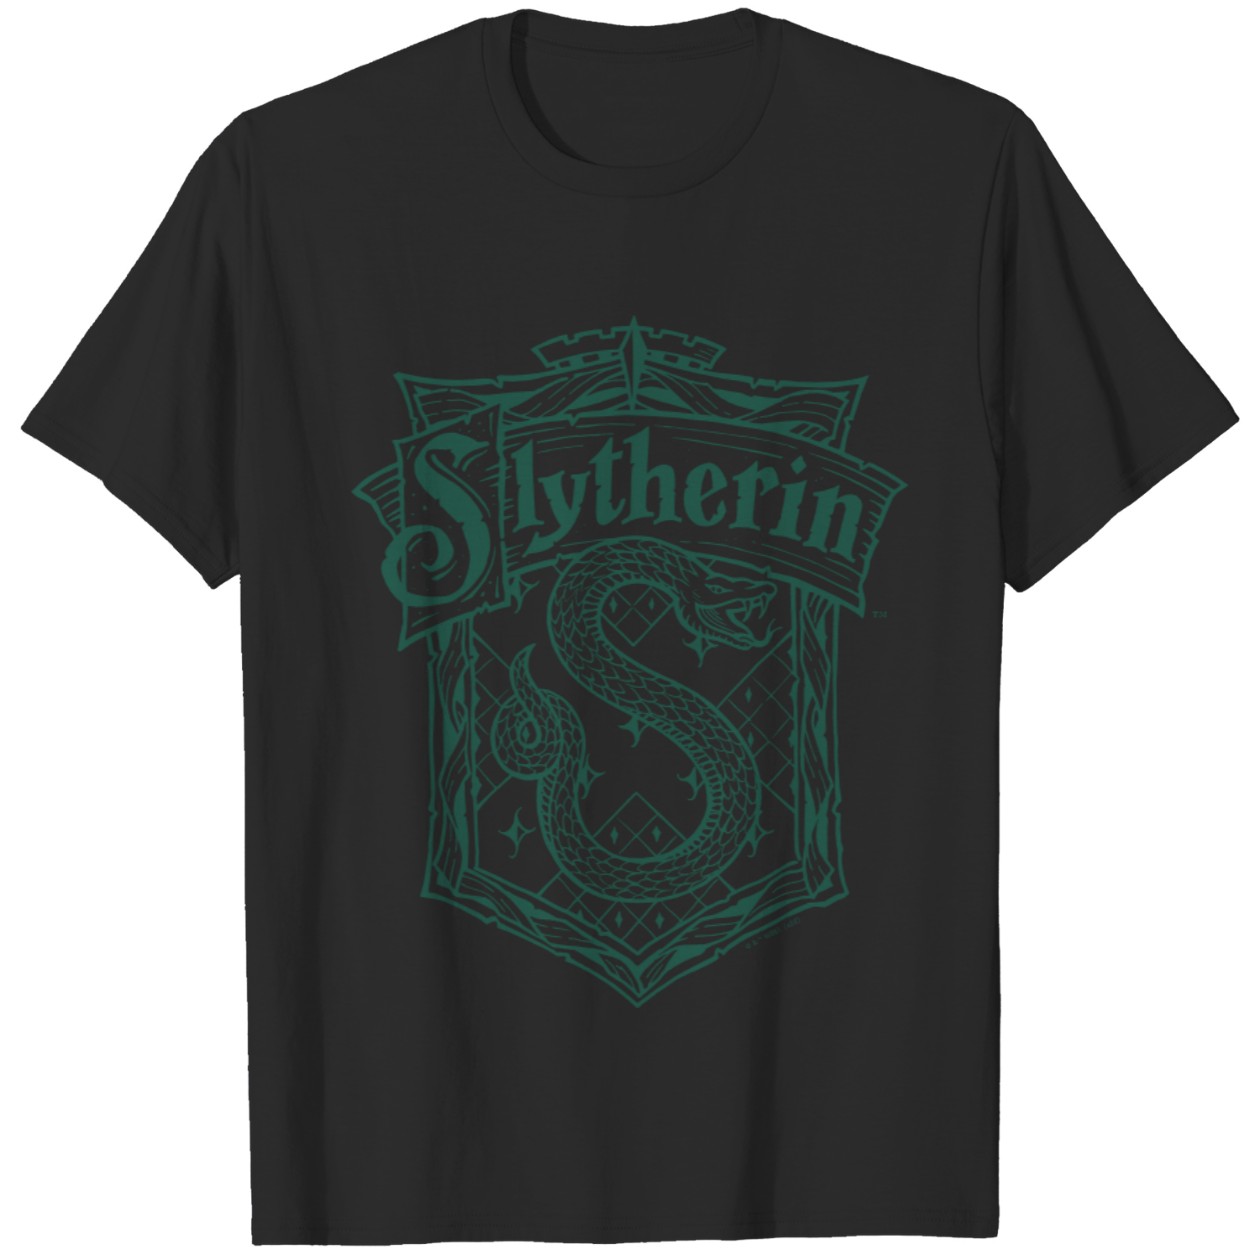 Harry Potter Slytherin House Crest Graphic Tee IYT